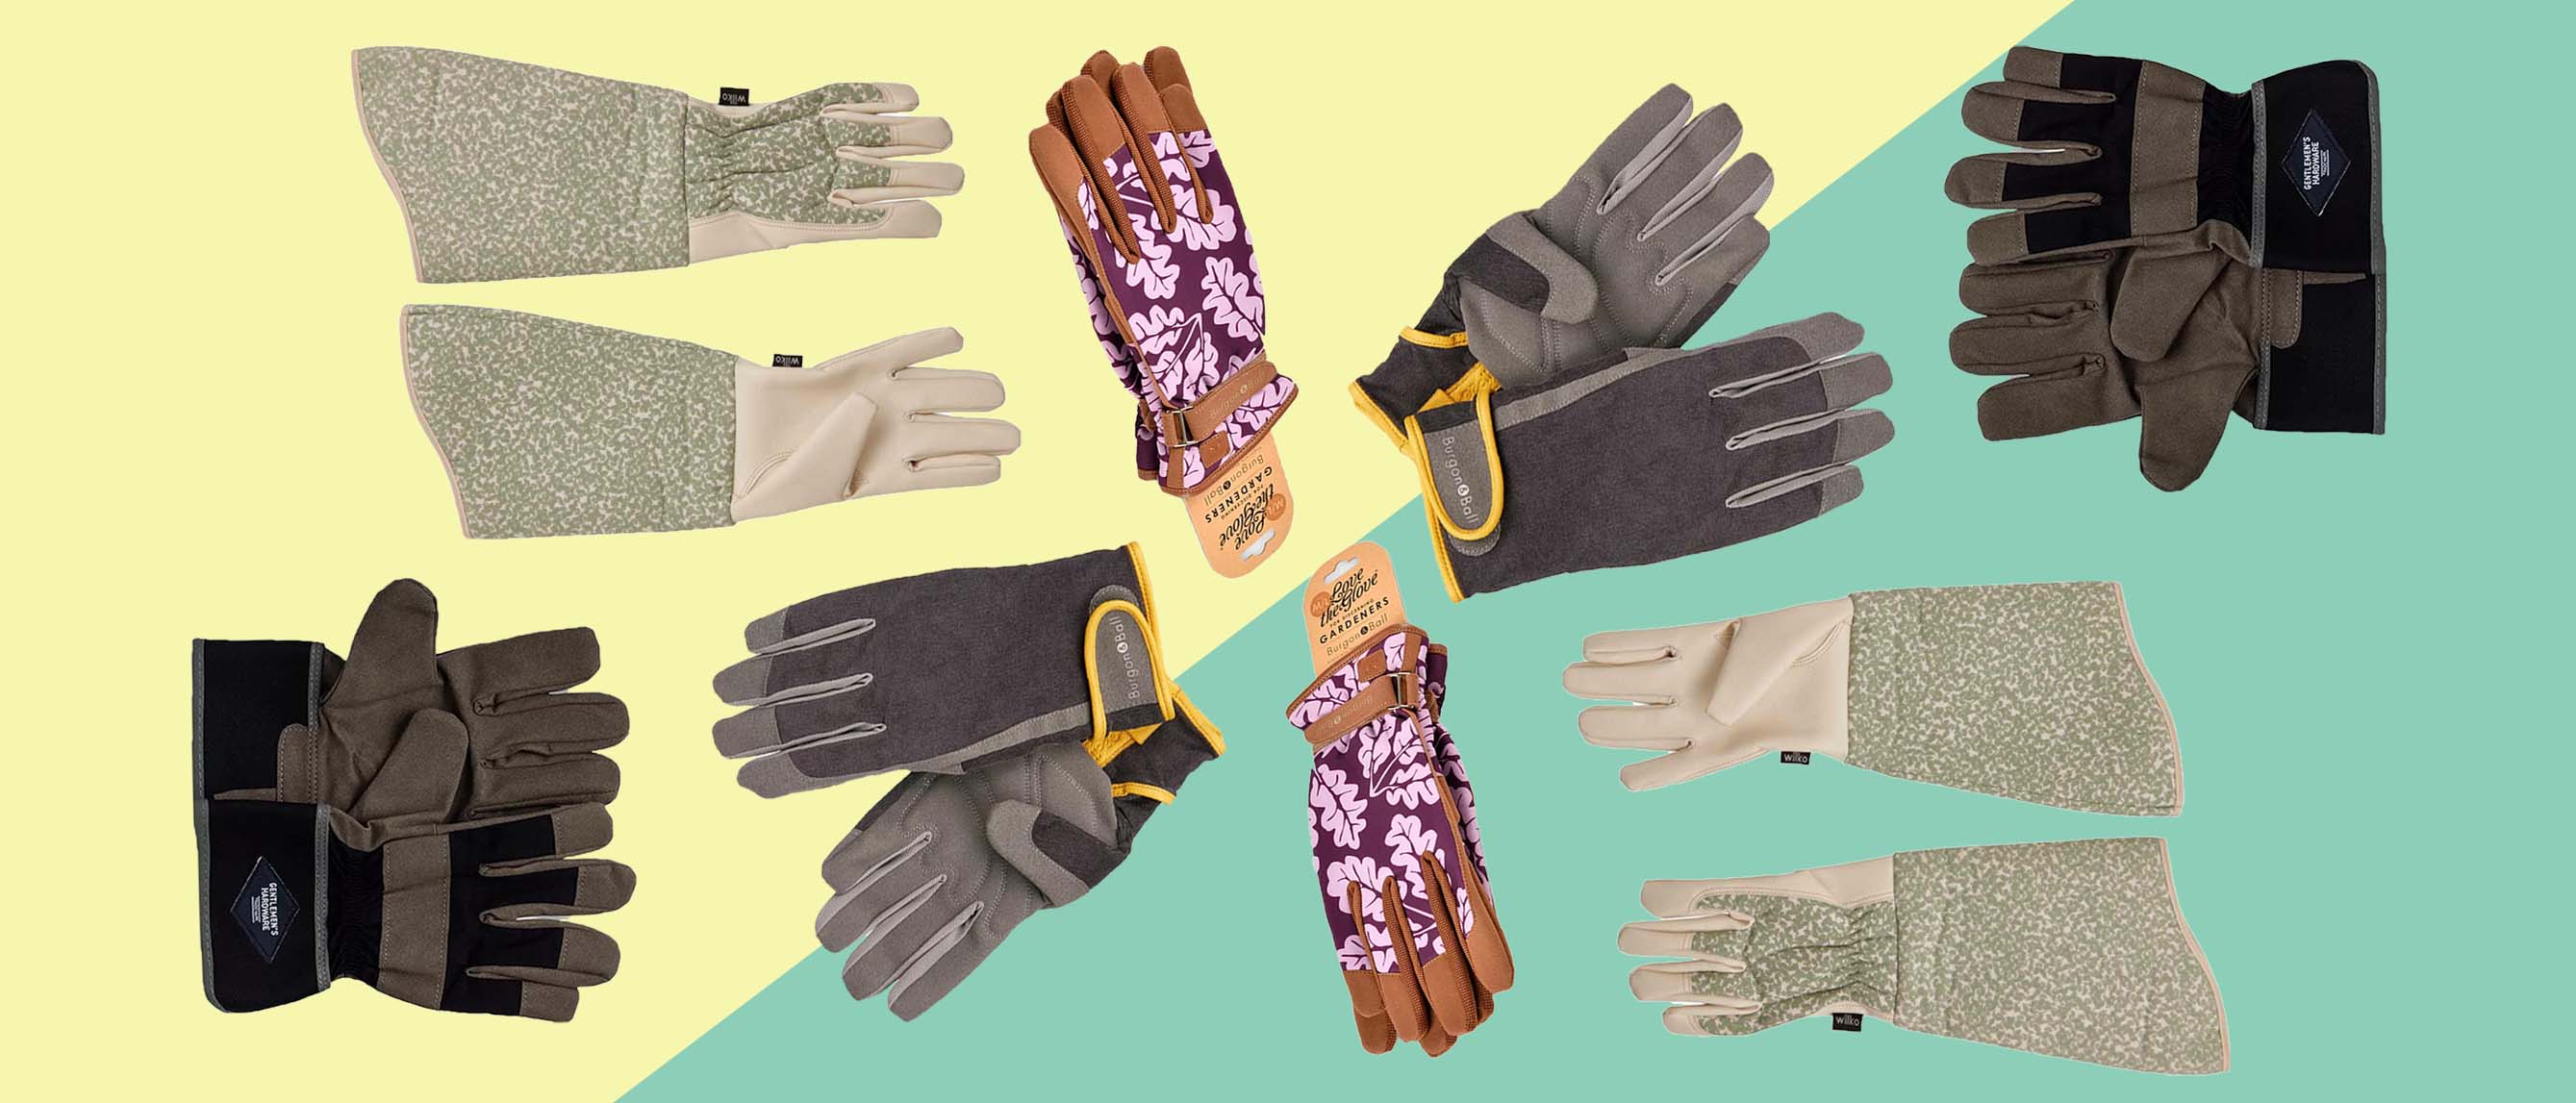 Best gardening gloves 2022: Leather and fleece for thorns, spines